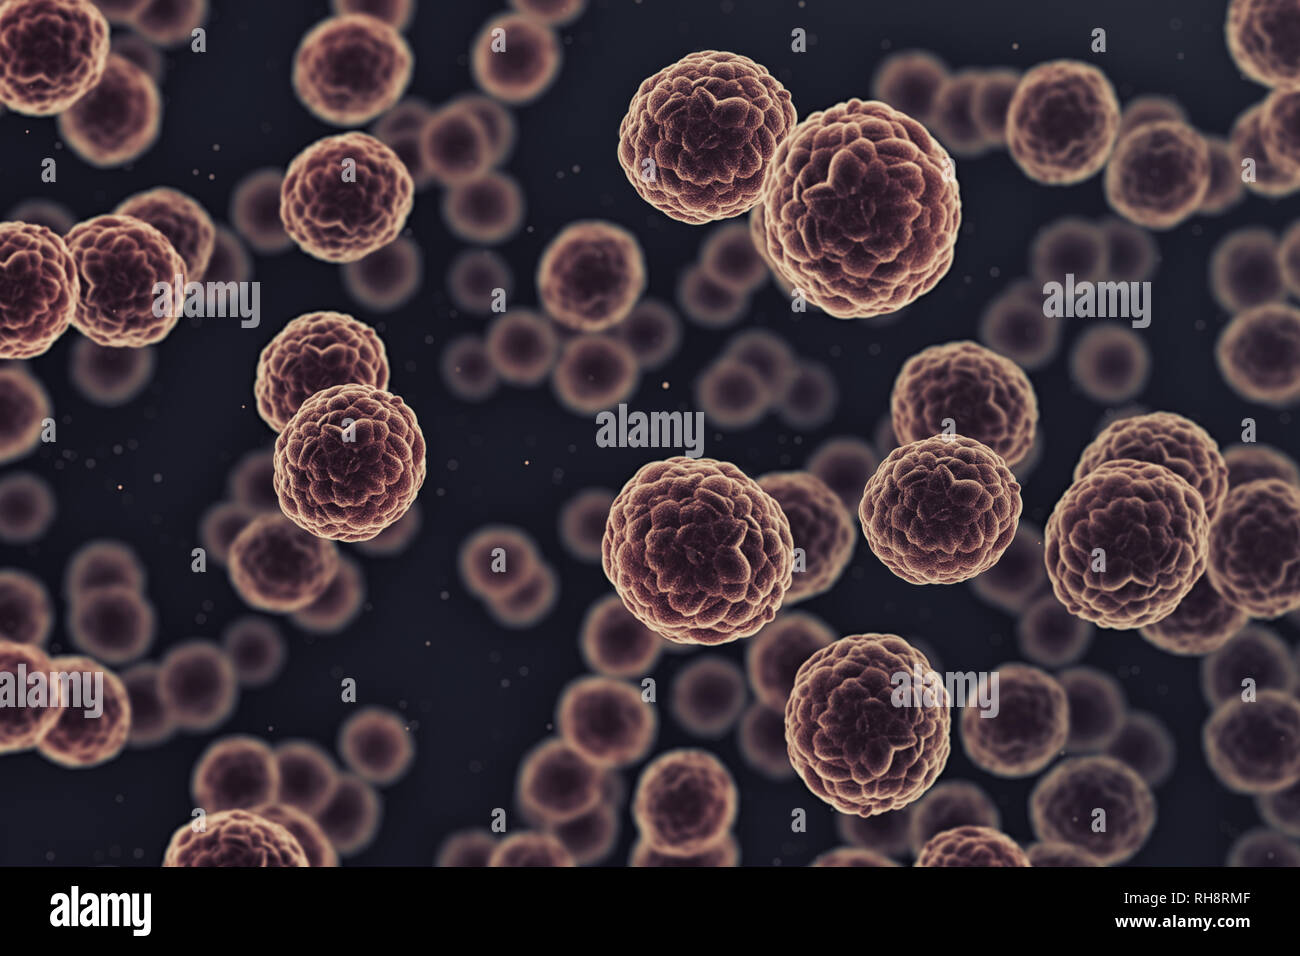 Group of cancer cells under a microscope Stock Photo